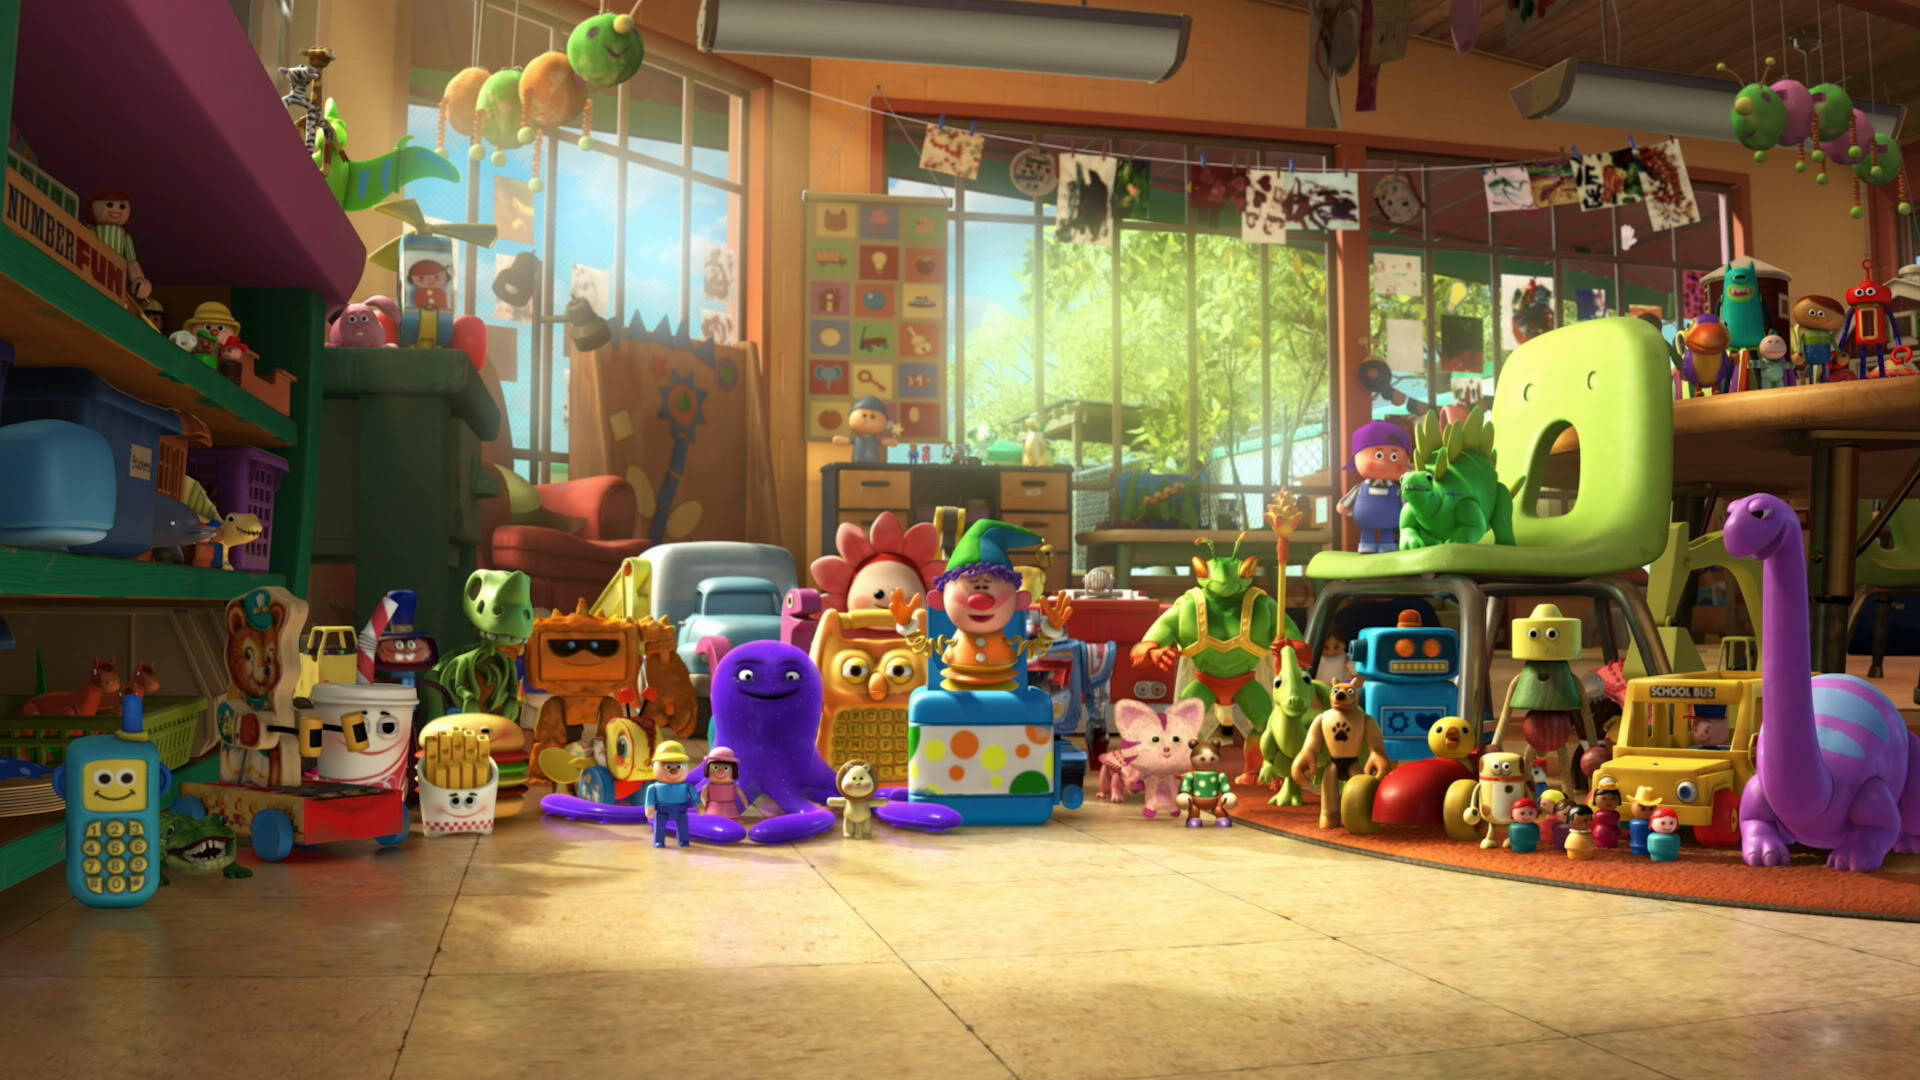 Toy Story 3 Toys In Playroom Wallpaper